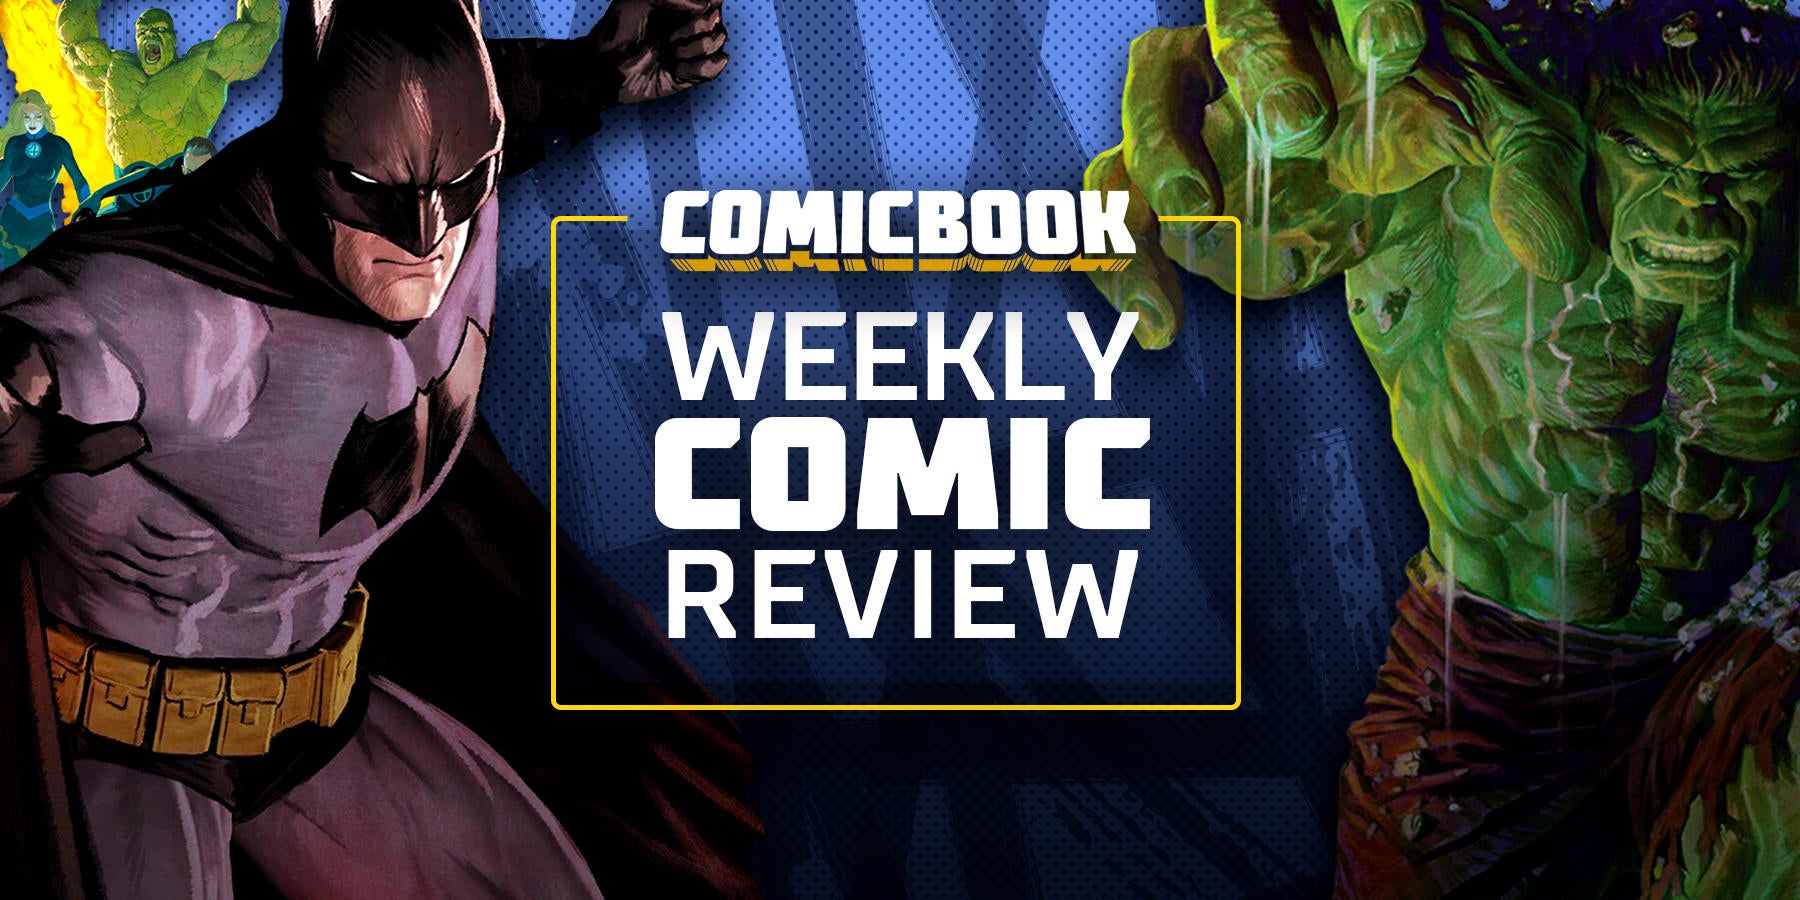 Weird Science DC Comics: The Man of Steel #6 Review and **SPOILERS**